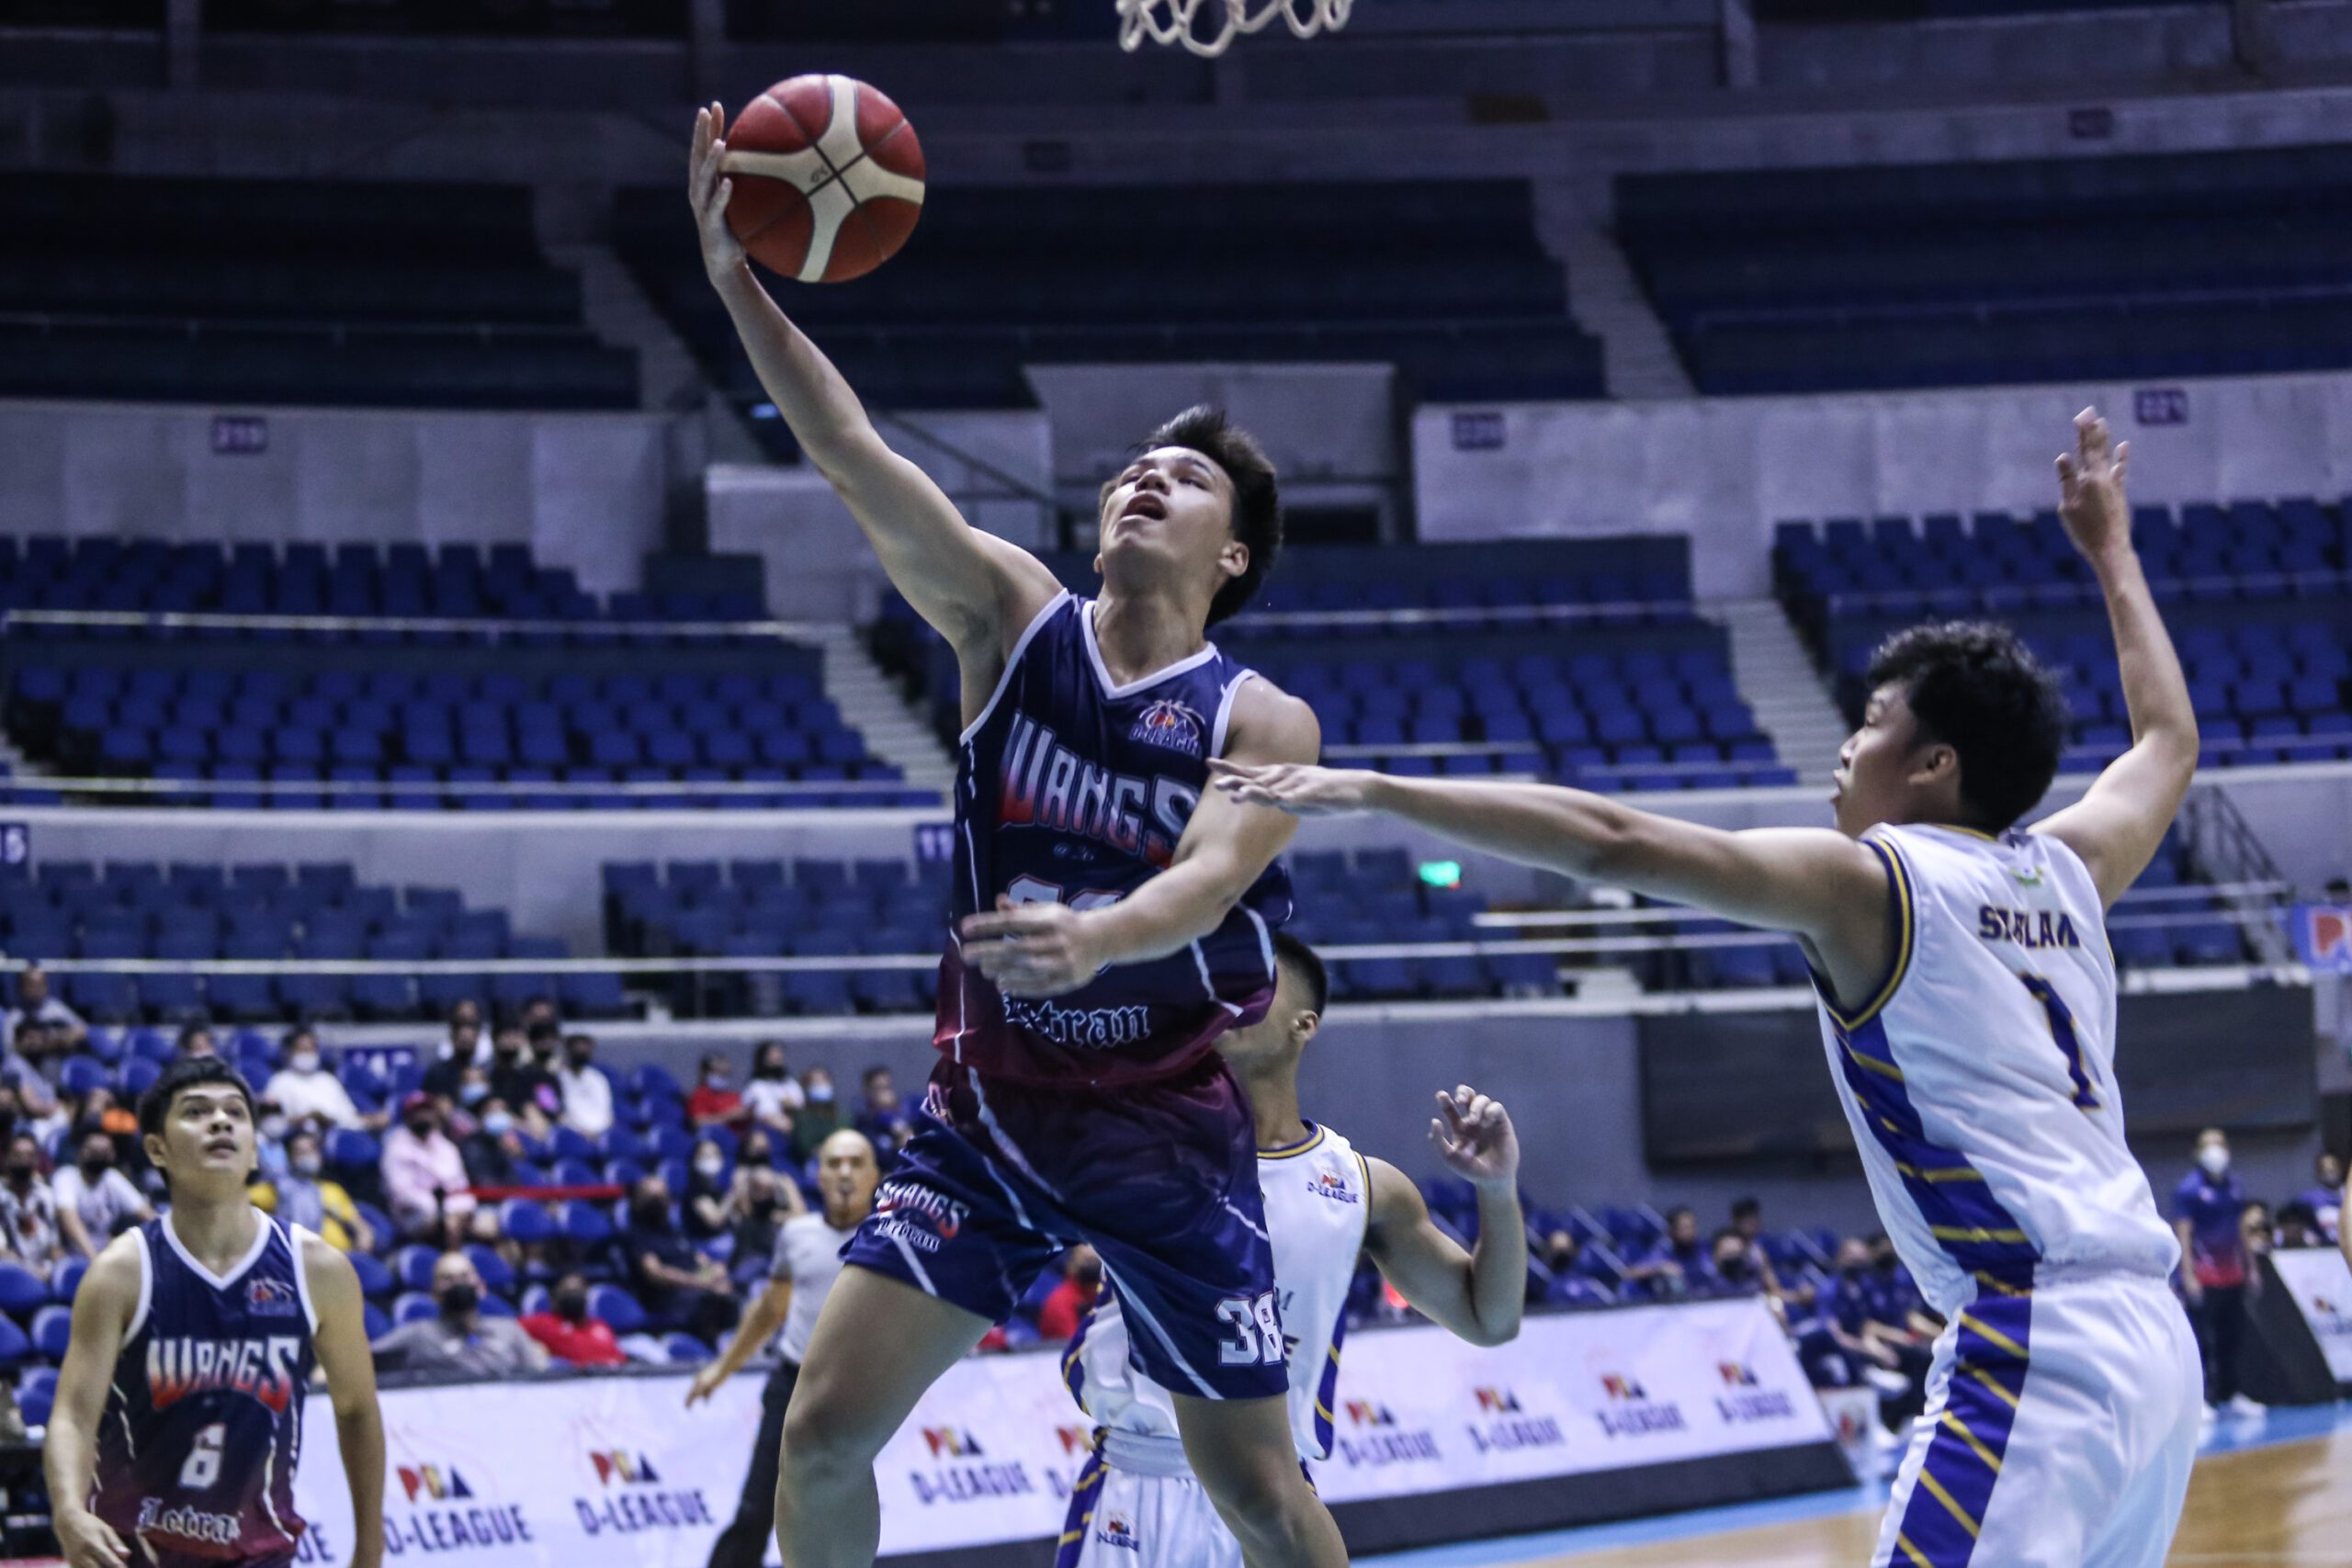 Letran averts meltdown, denies St. Clare comeback for first D-League win